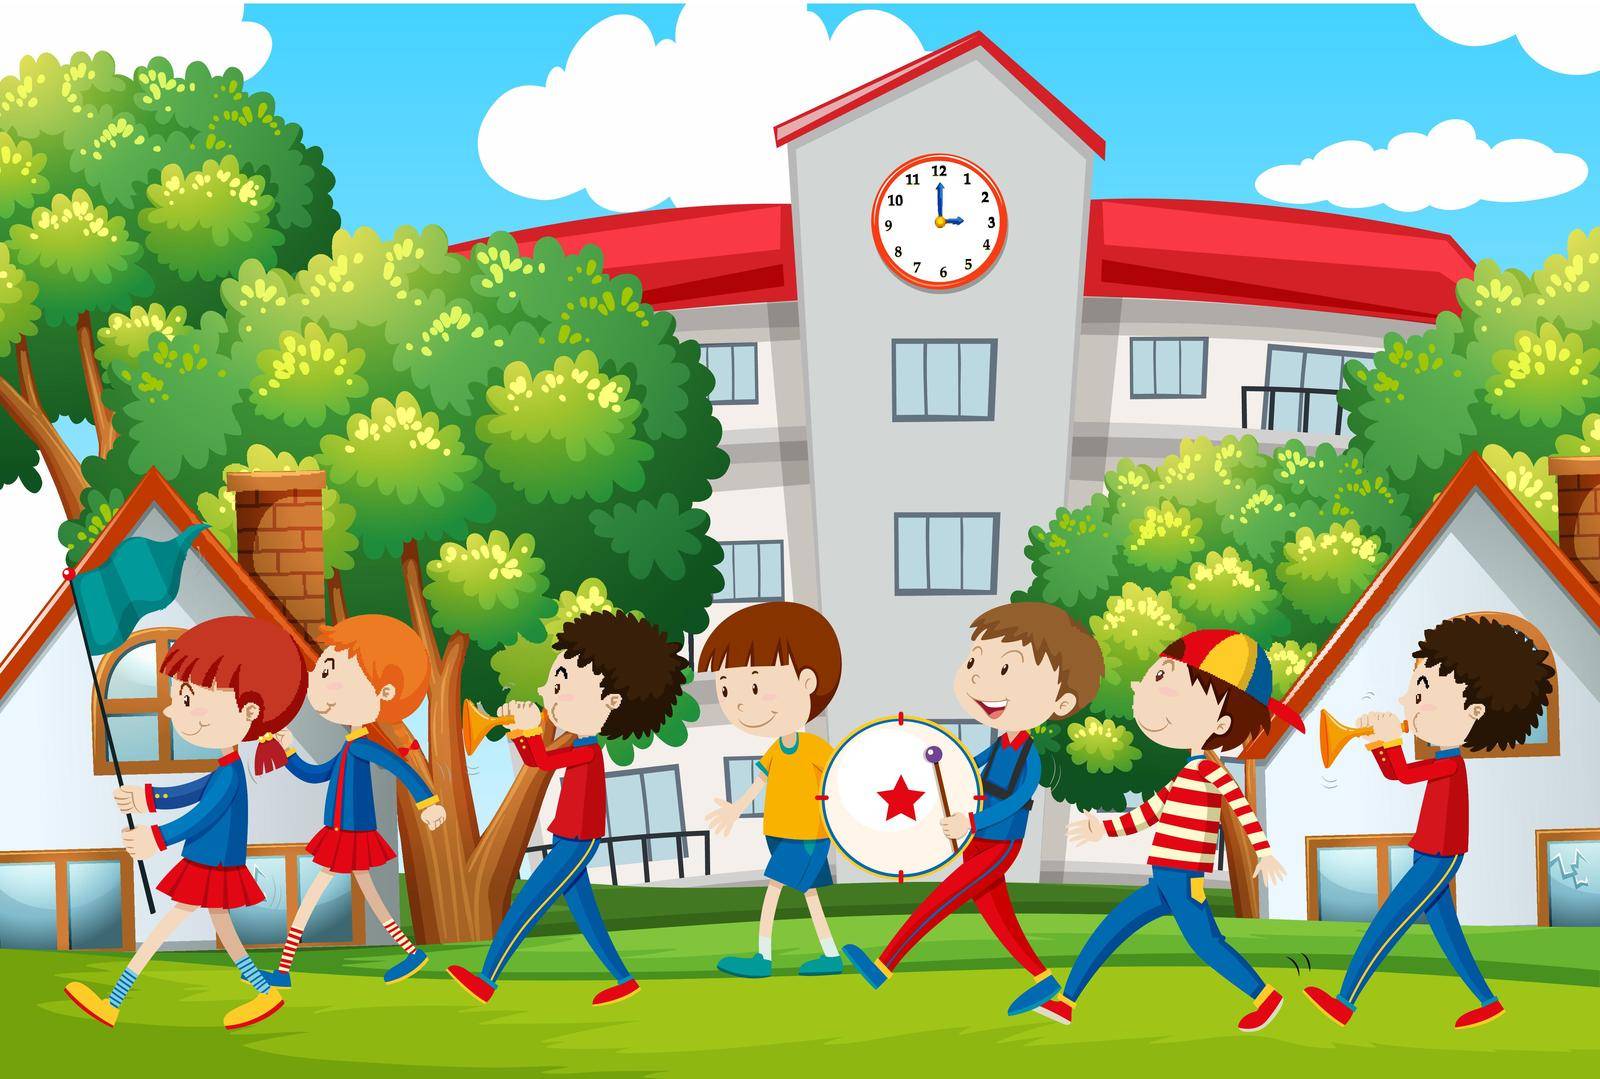 School band marching in front of school illustration